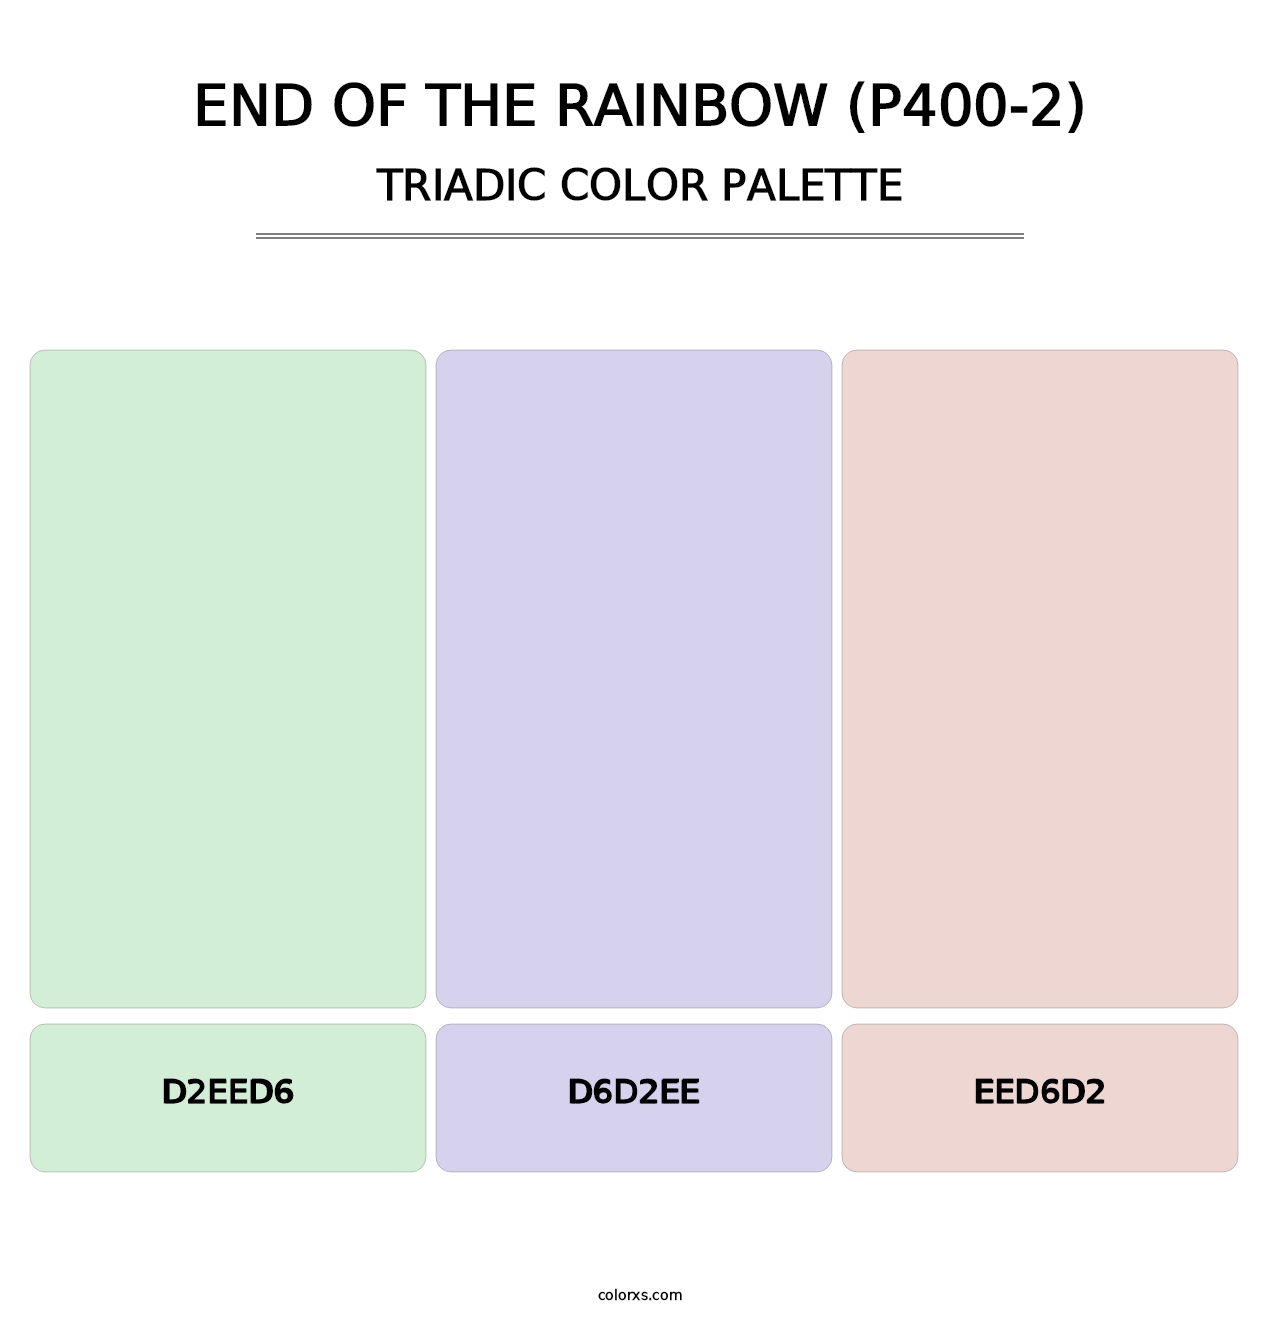 End Of The Rainbow (P400-2) - Triadic Color Palette